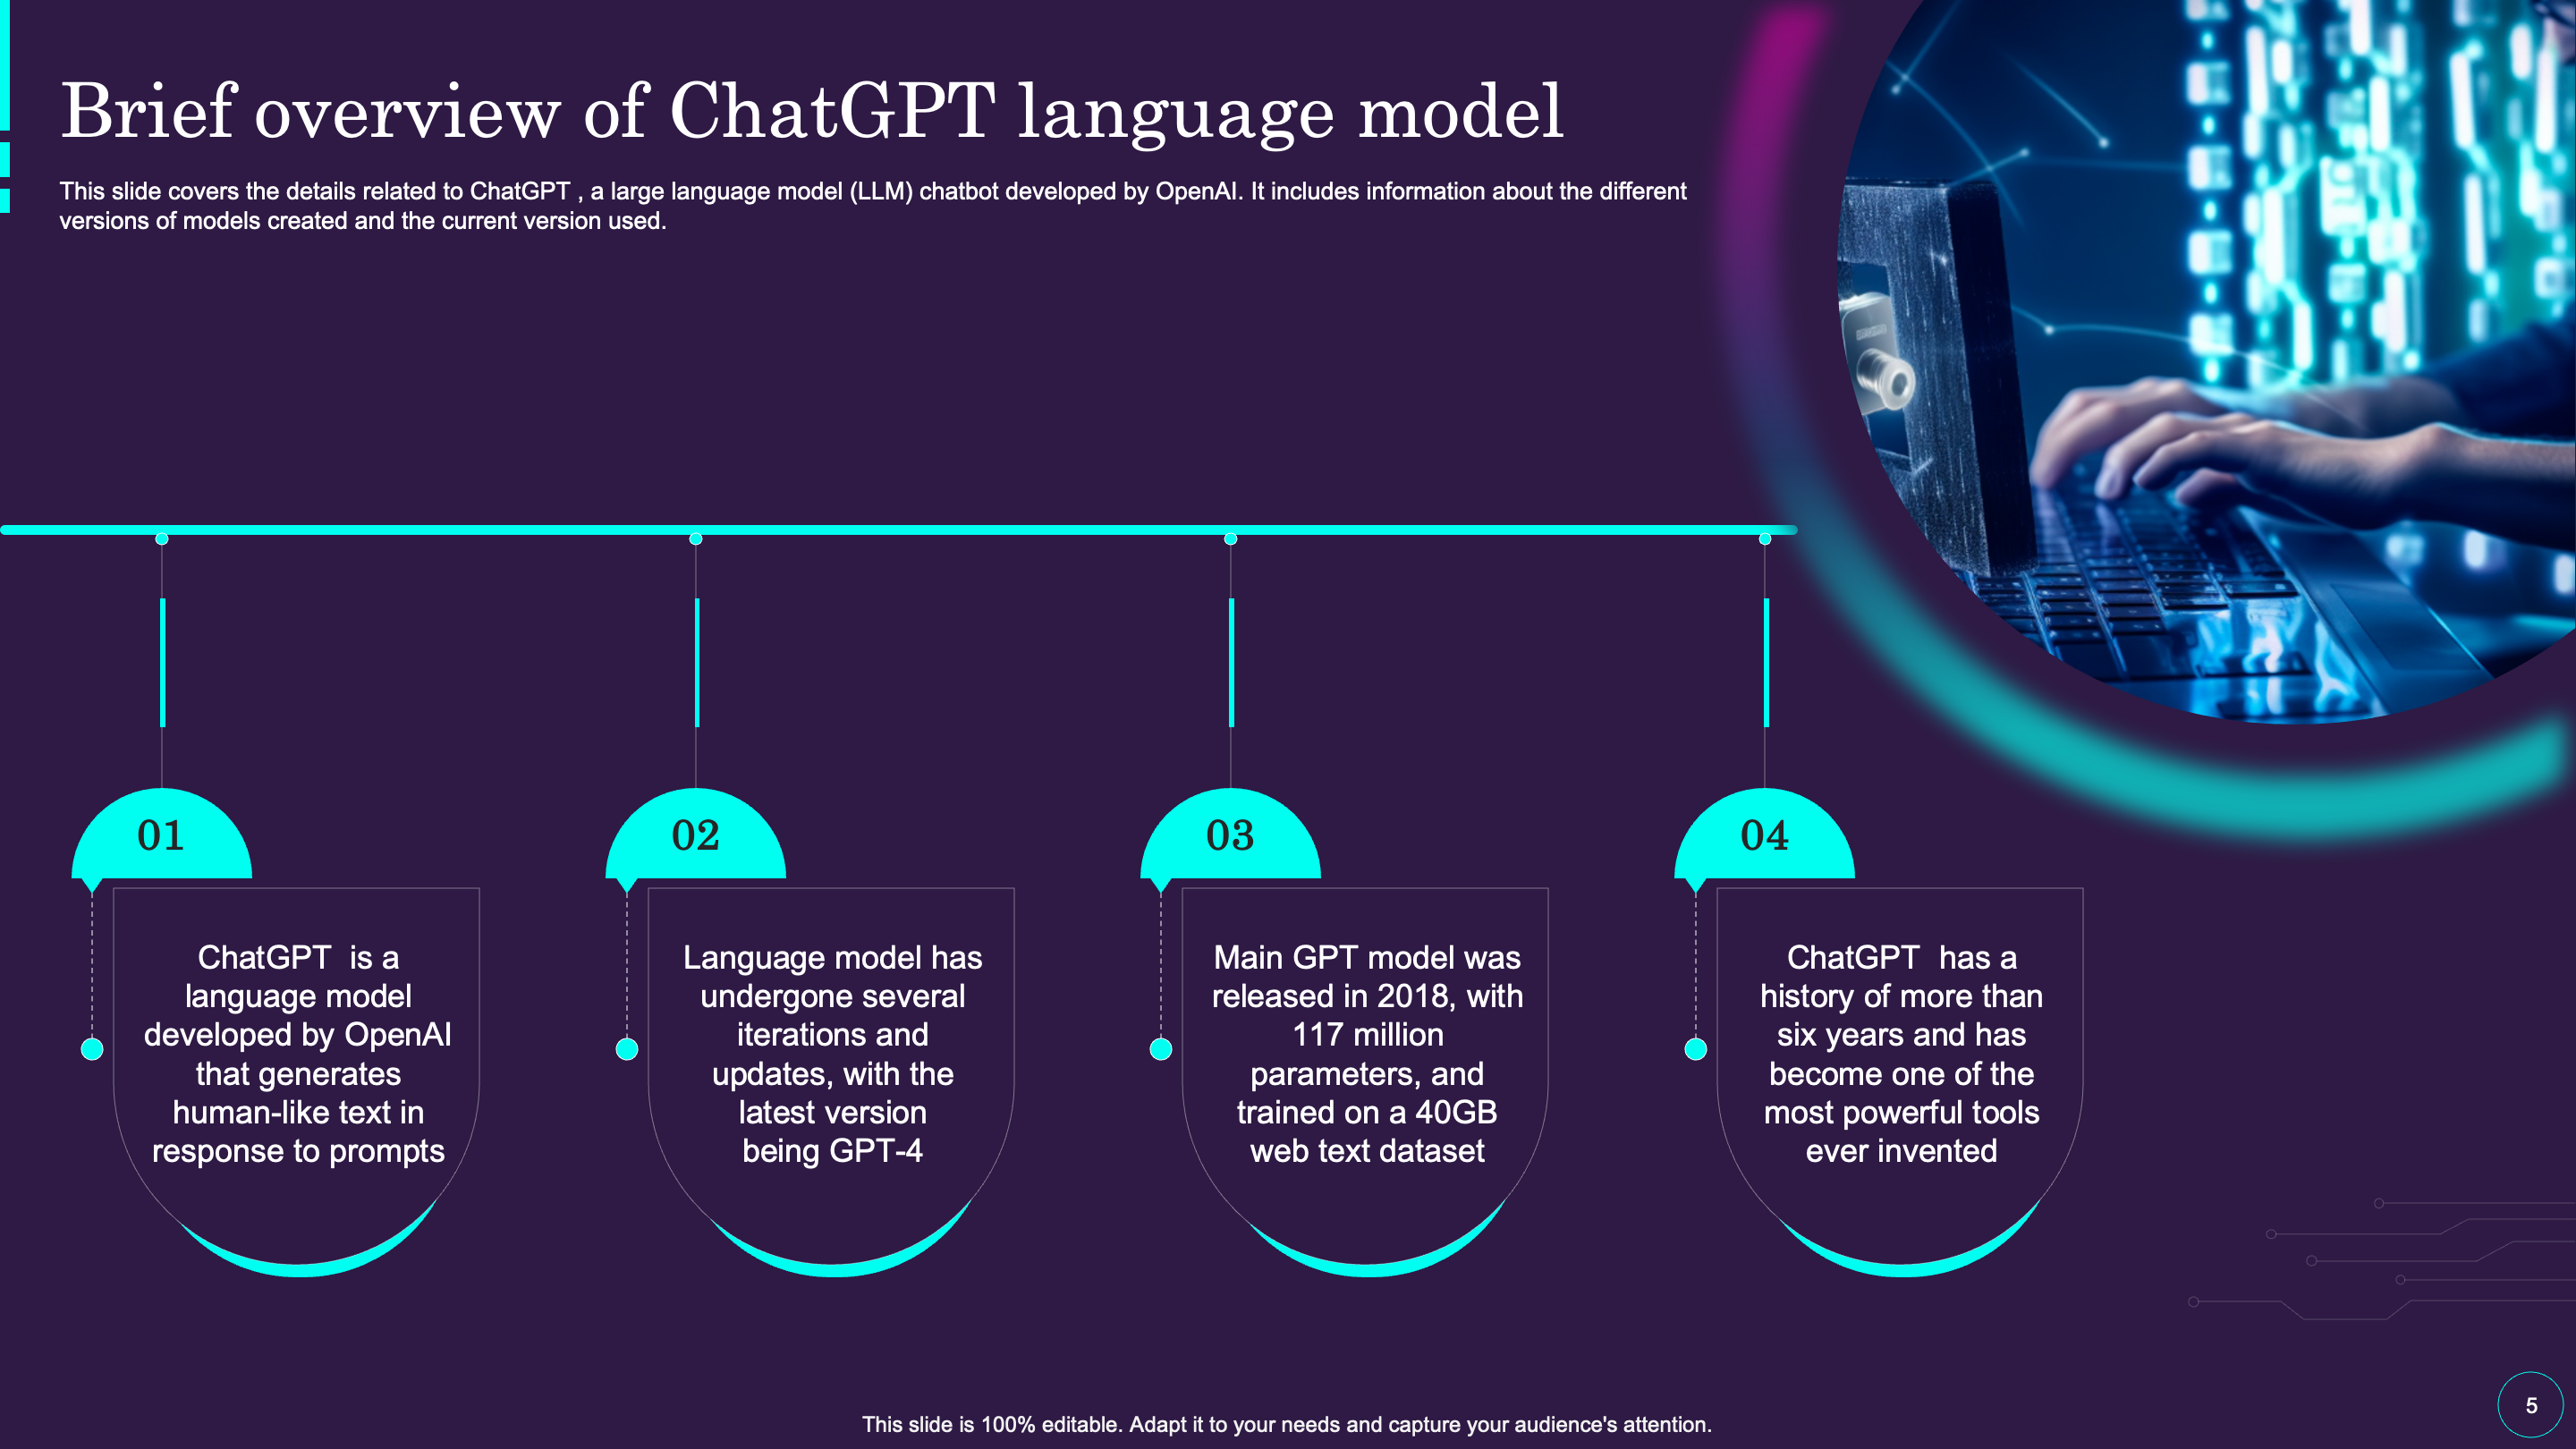 Brief Overview of ChatGPT Language Model